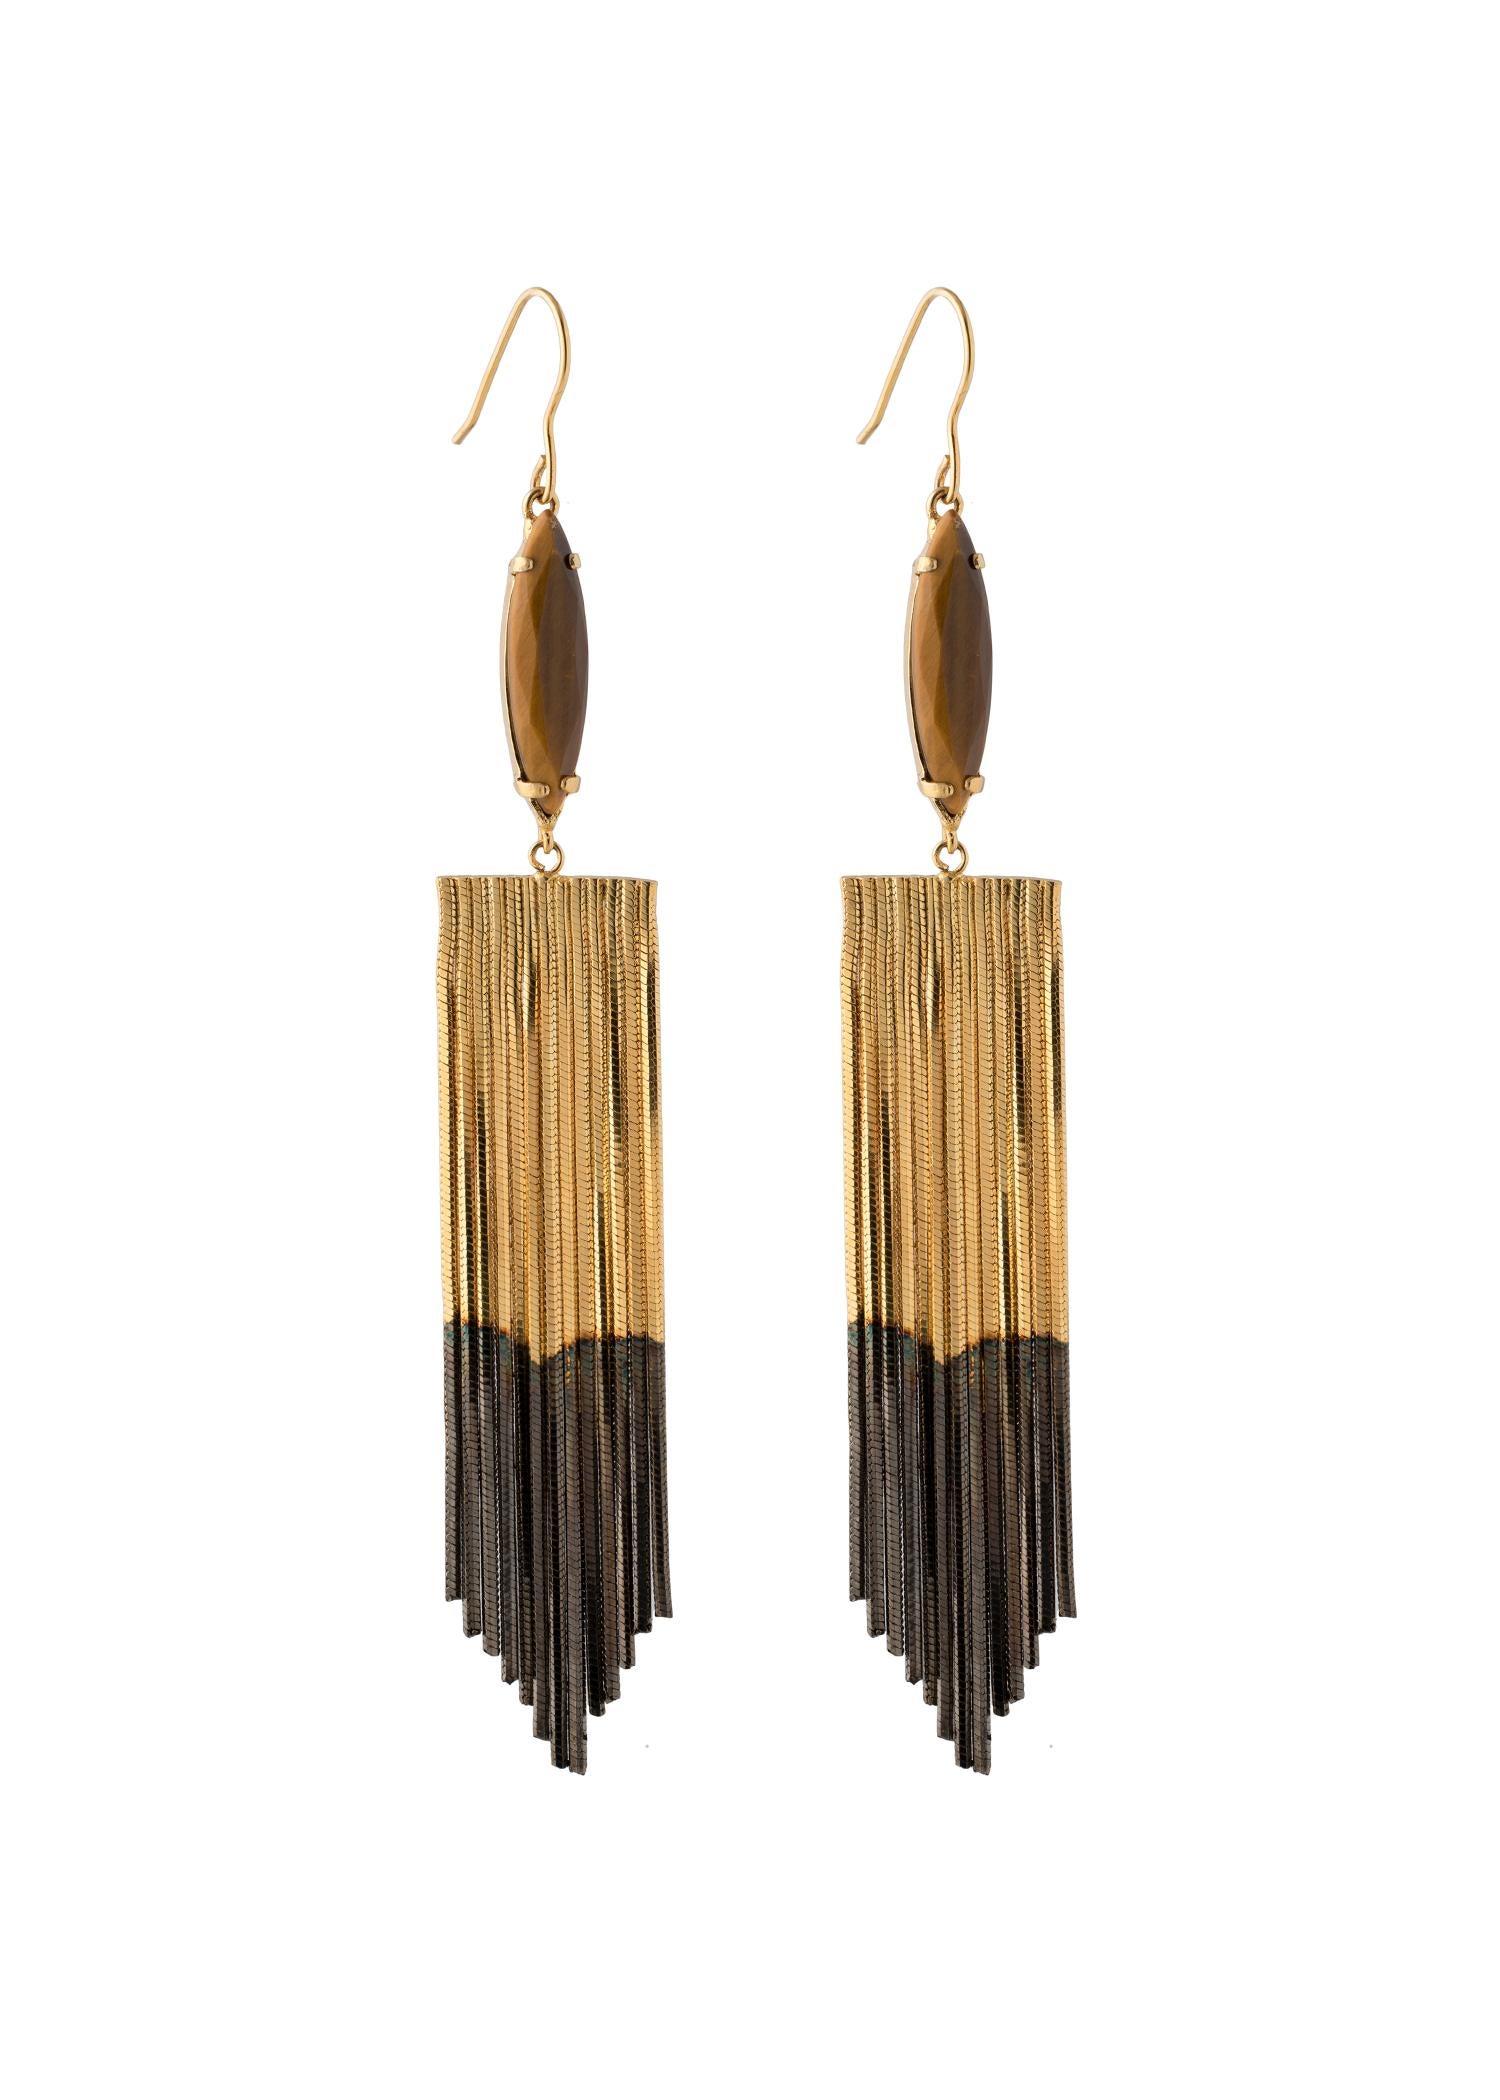 Marquise Cut 18 Carat Two Tones Gold Plated Fringed Earrings, Agate Navettes from IOSSELLIANI For Sale